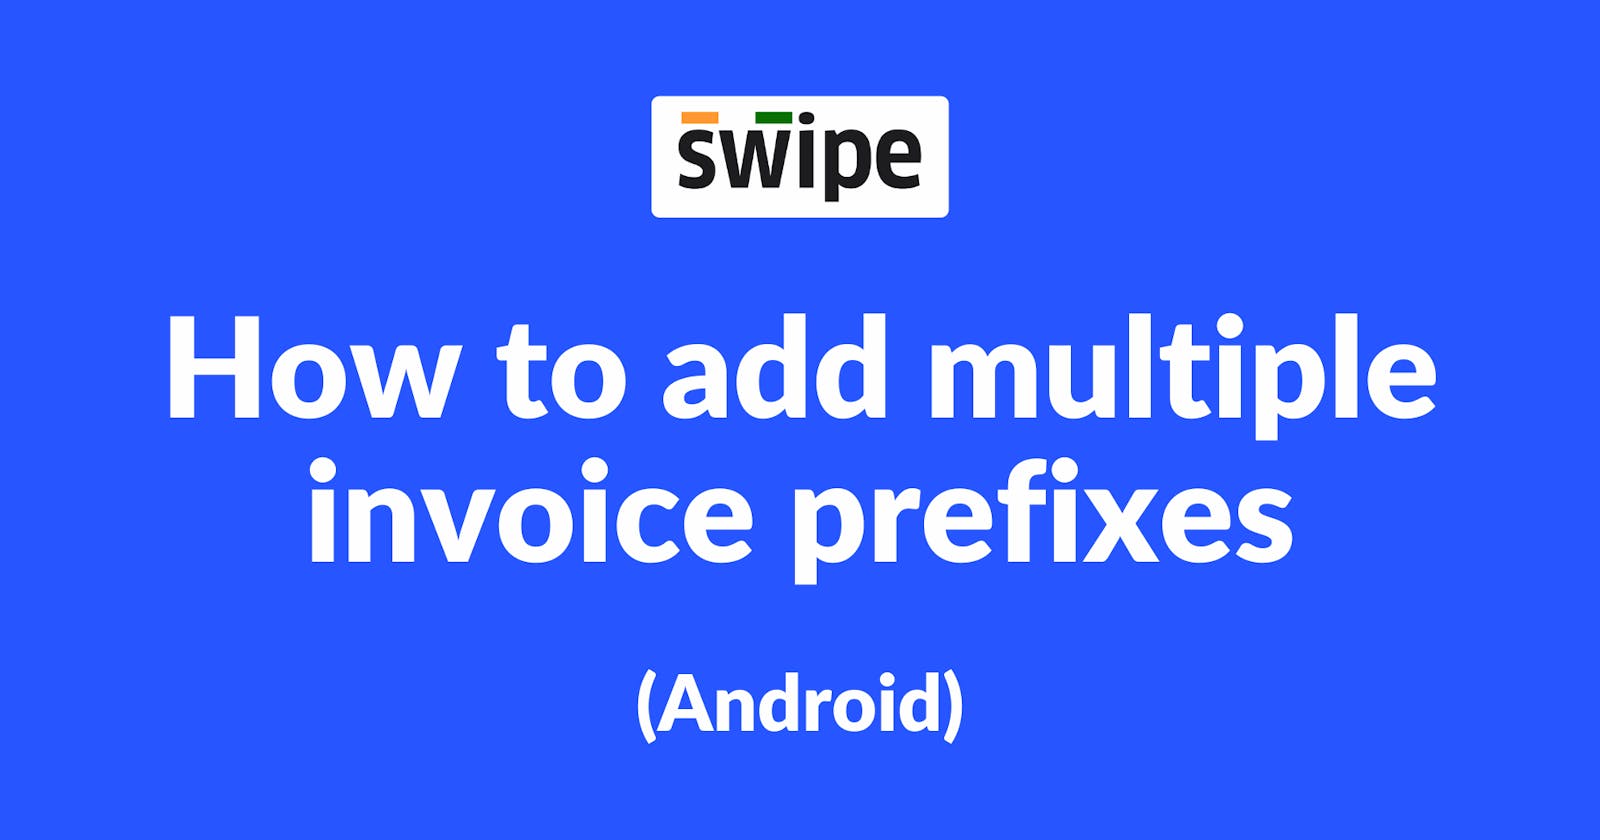 How to add multiple invoice prefixes on Android